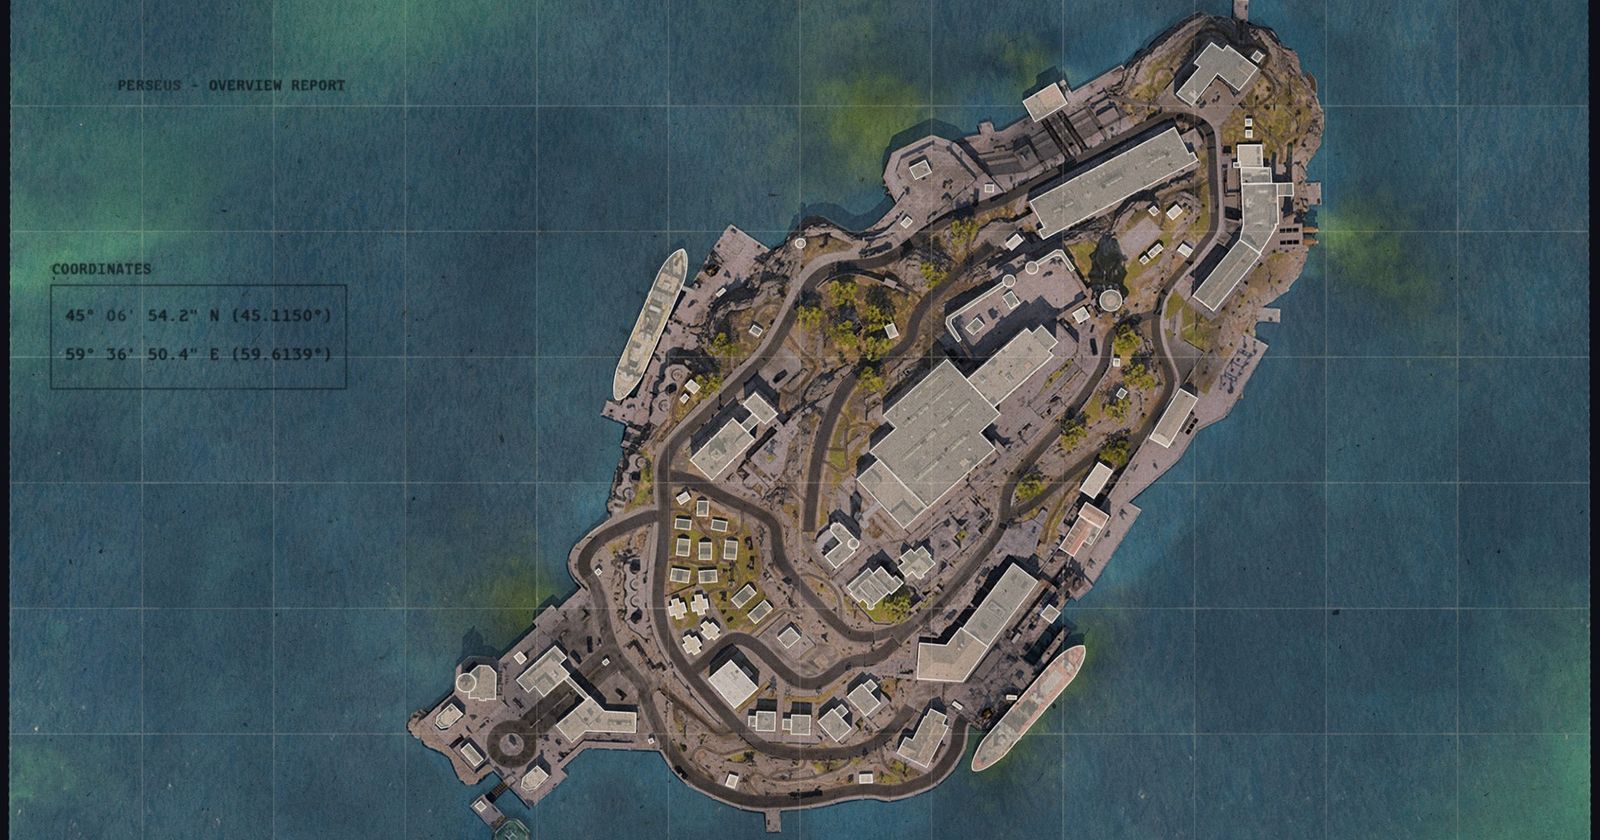 Warzone 2 Rebirth Island: Will It Have a Small Map? - GameRevolution